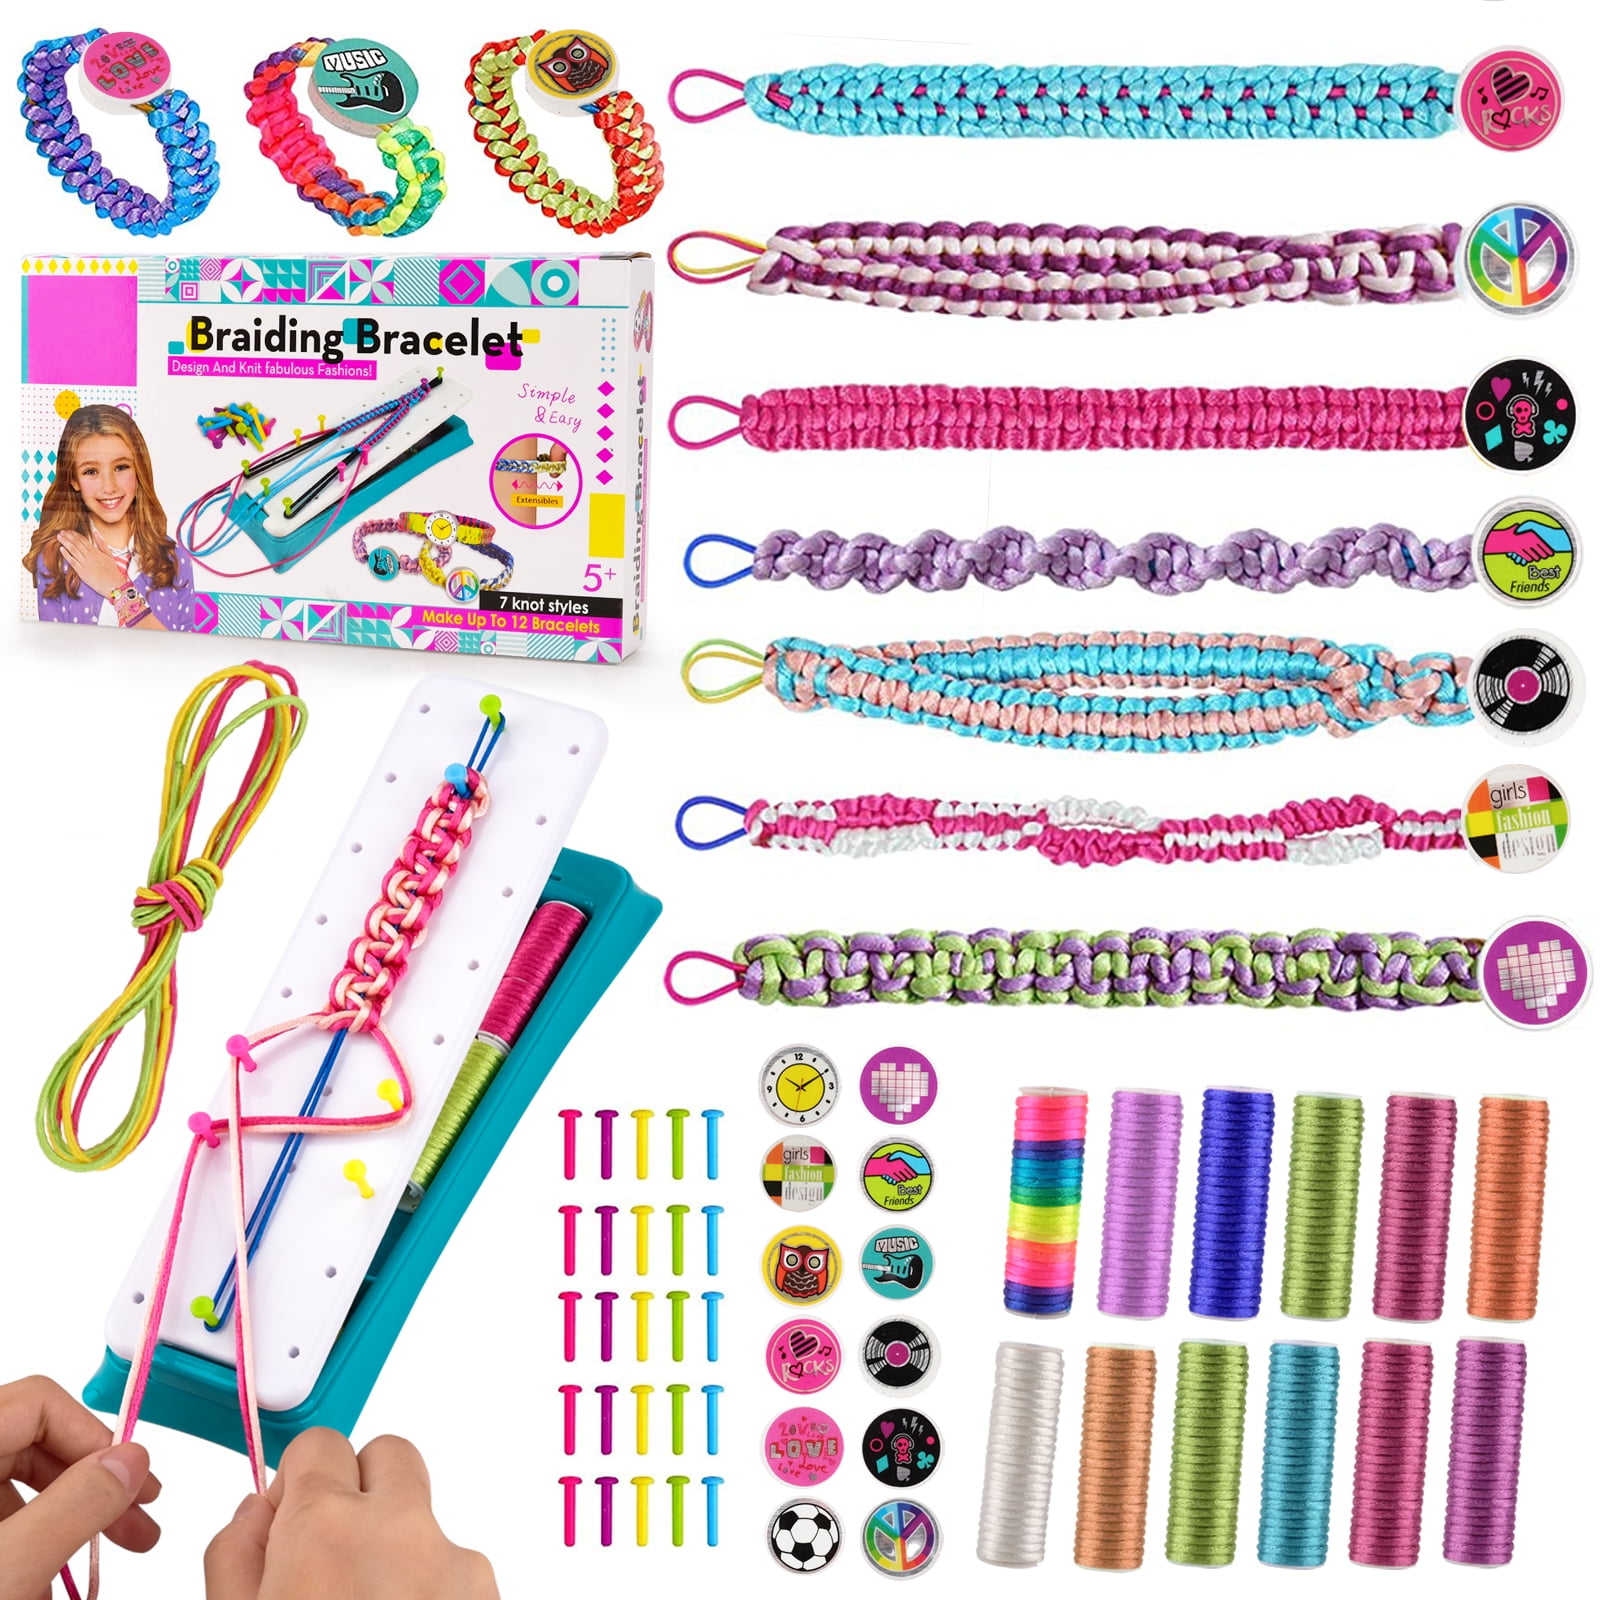 Amazon.com: Beads Art Crafts Toys, Acrylic Beads Bracelet Making Kits DIY  Beads Kits 24 Different Types and Shapes Colorful Acrylic Beads for Girls  Kids DIY Bead Set Gift for 4-9 Year Old